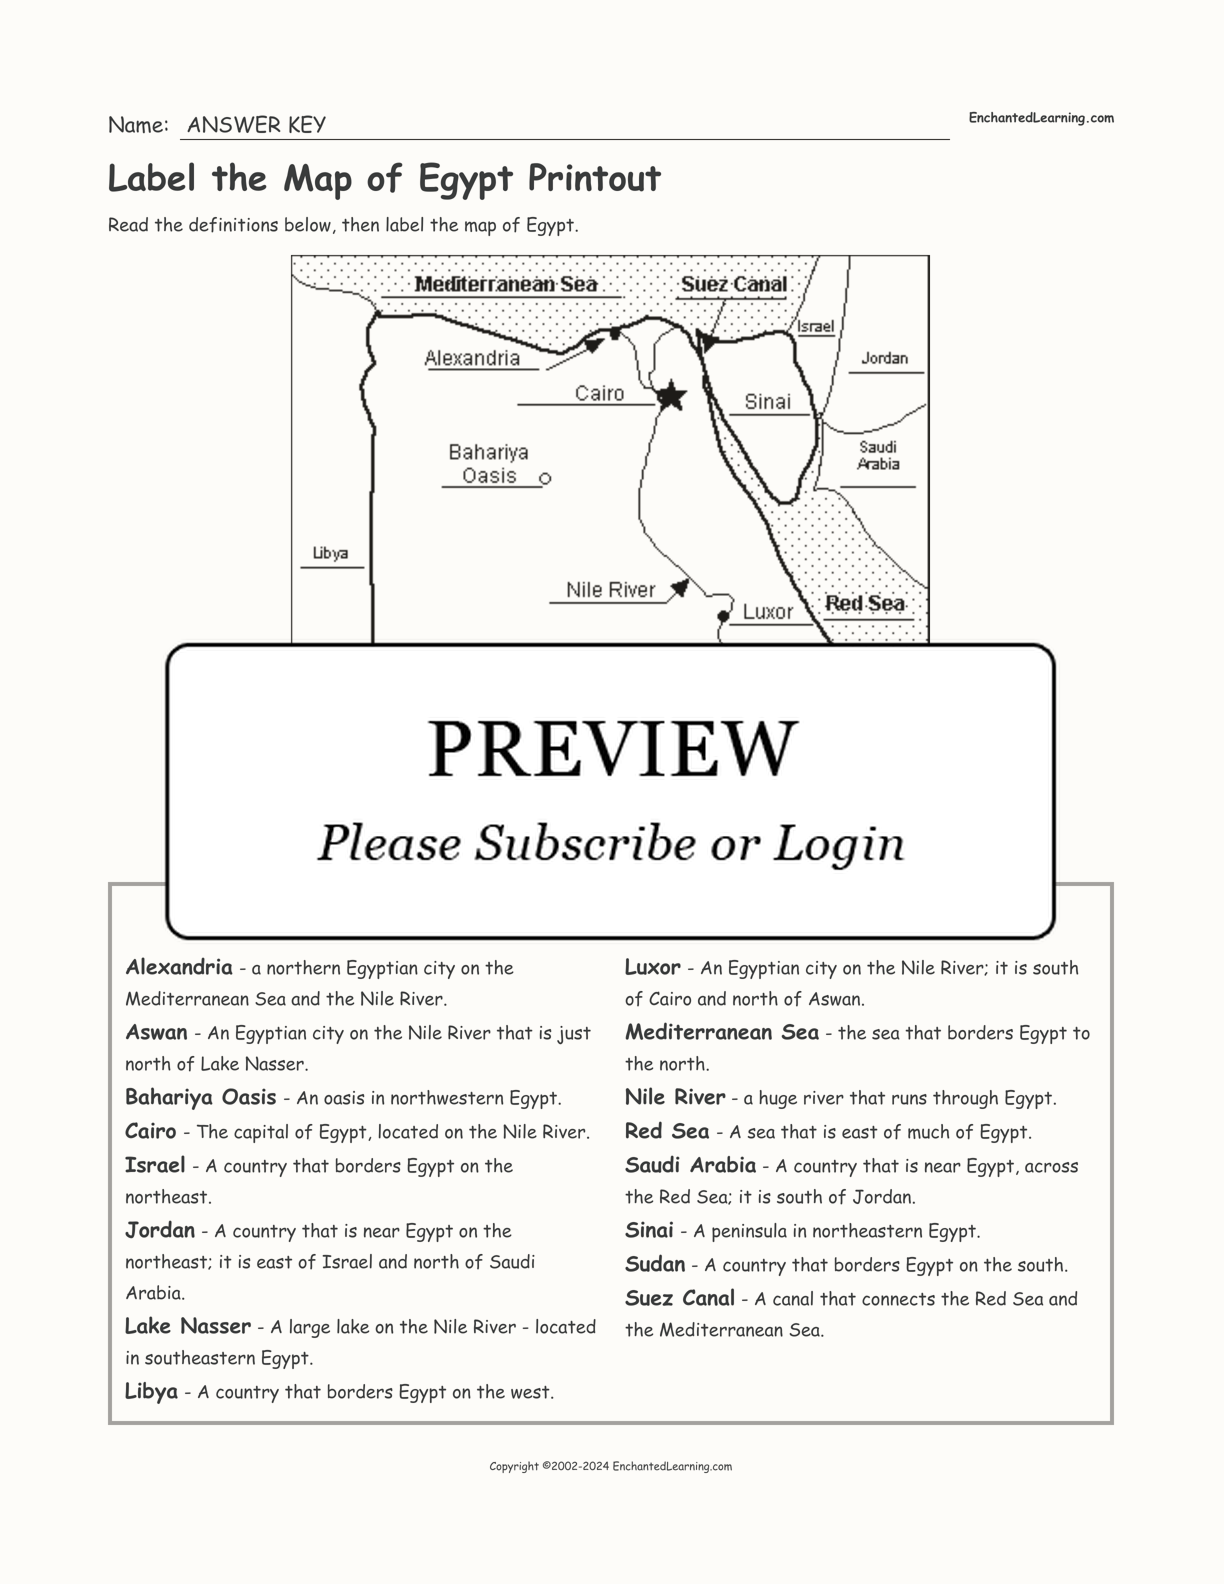 Label the Map of Egypt Printout interactive worksheet page 2